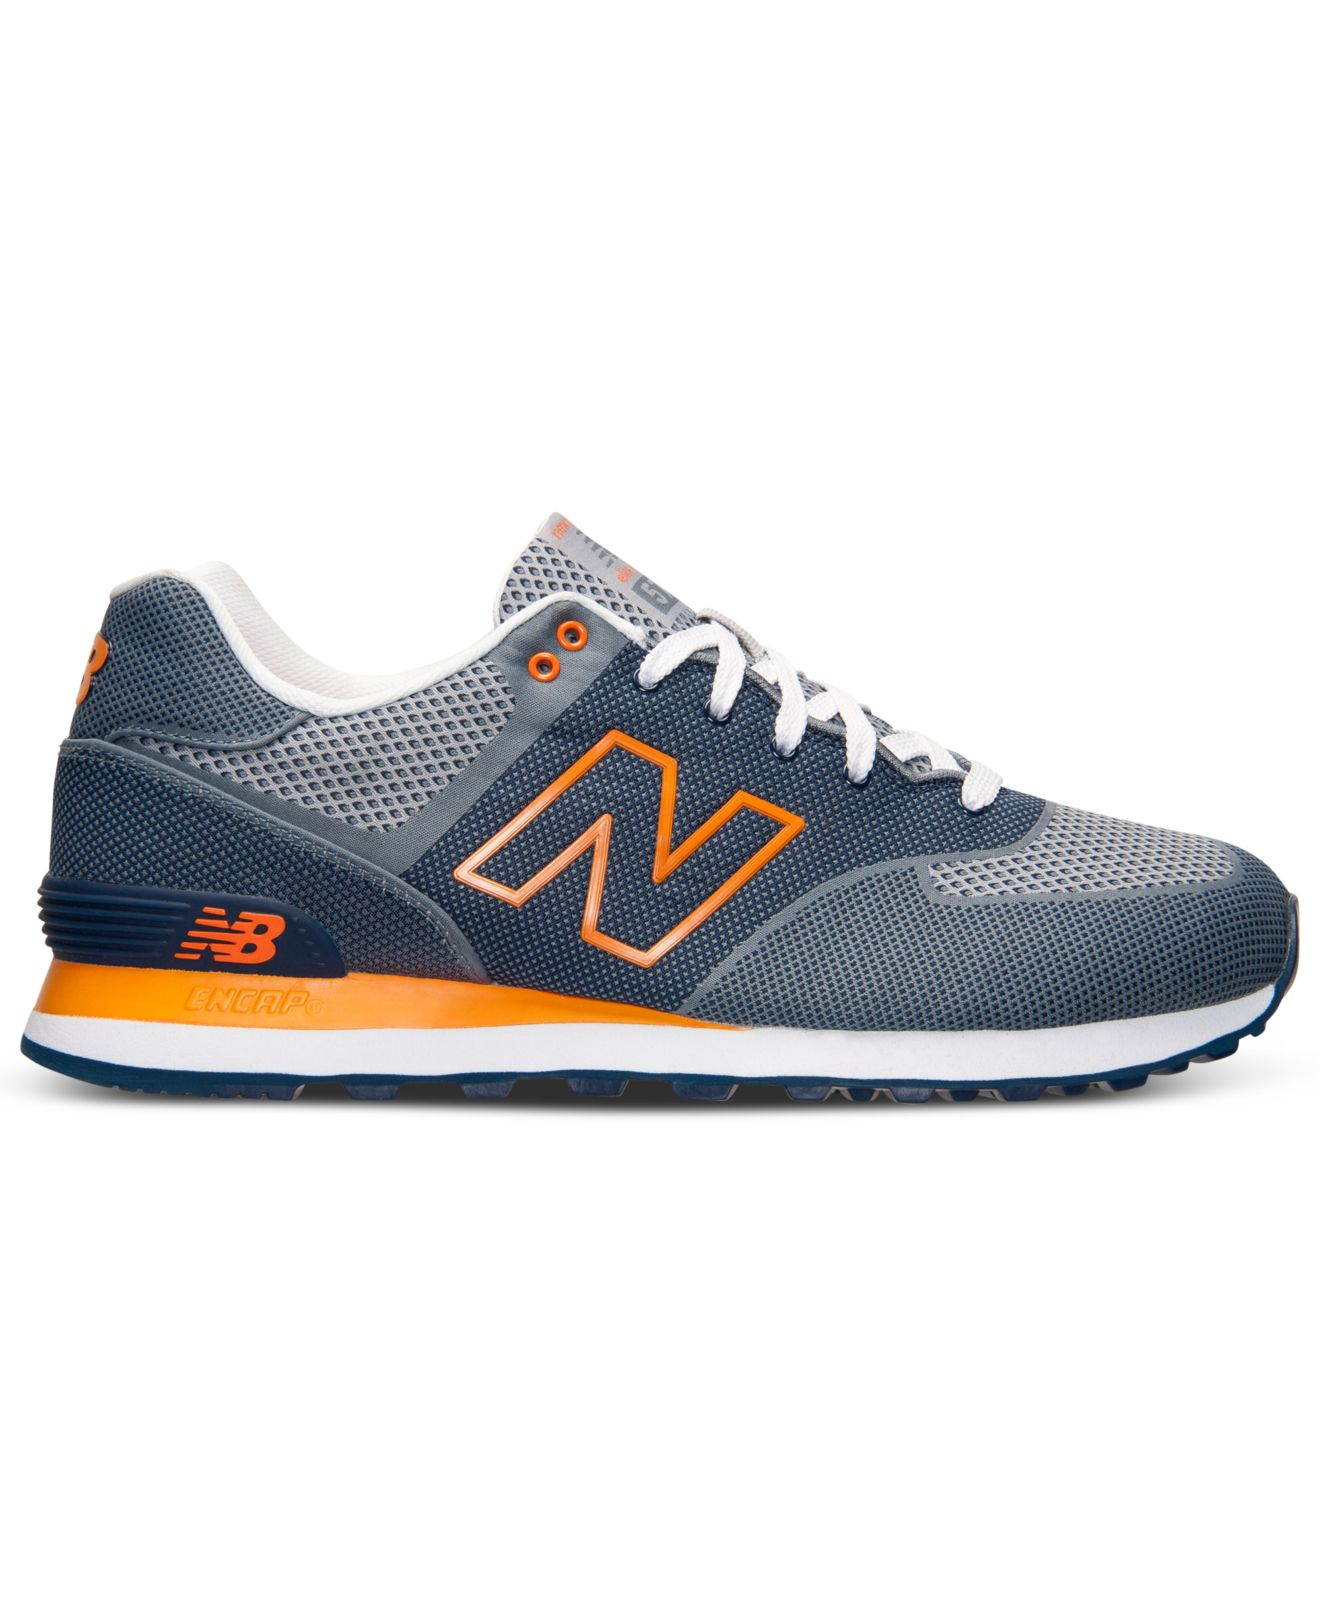 Lyst - New Balance Men's 574 Woven Casual Sneakers From Finish Line in ...